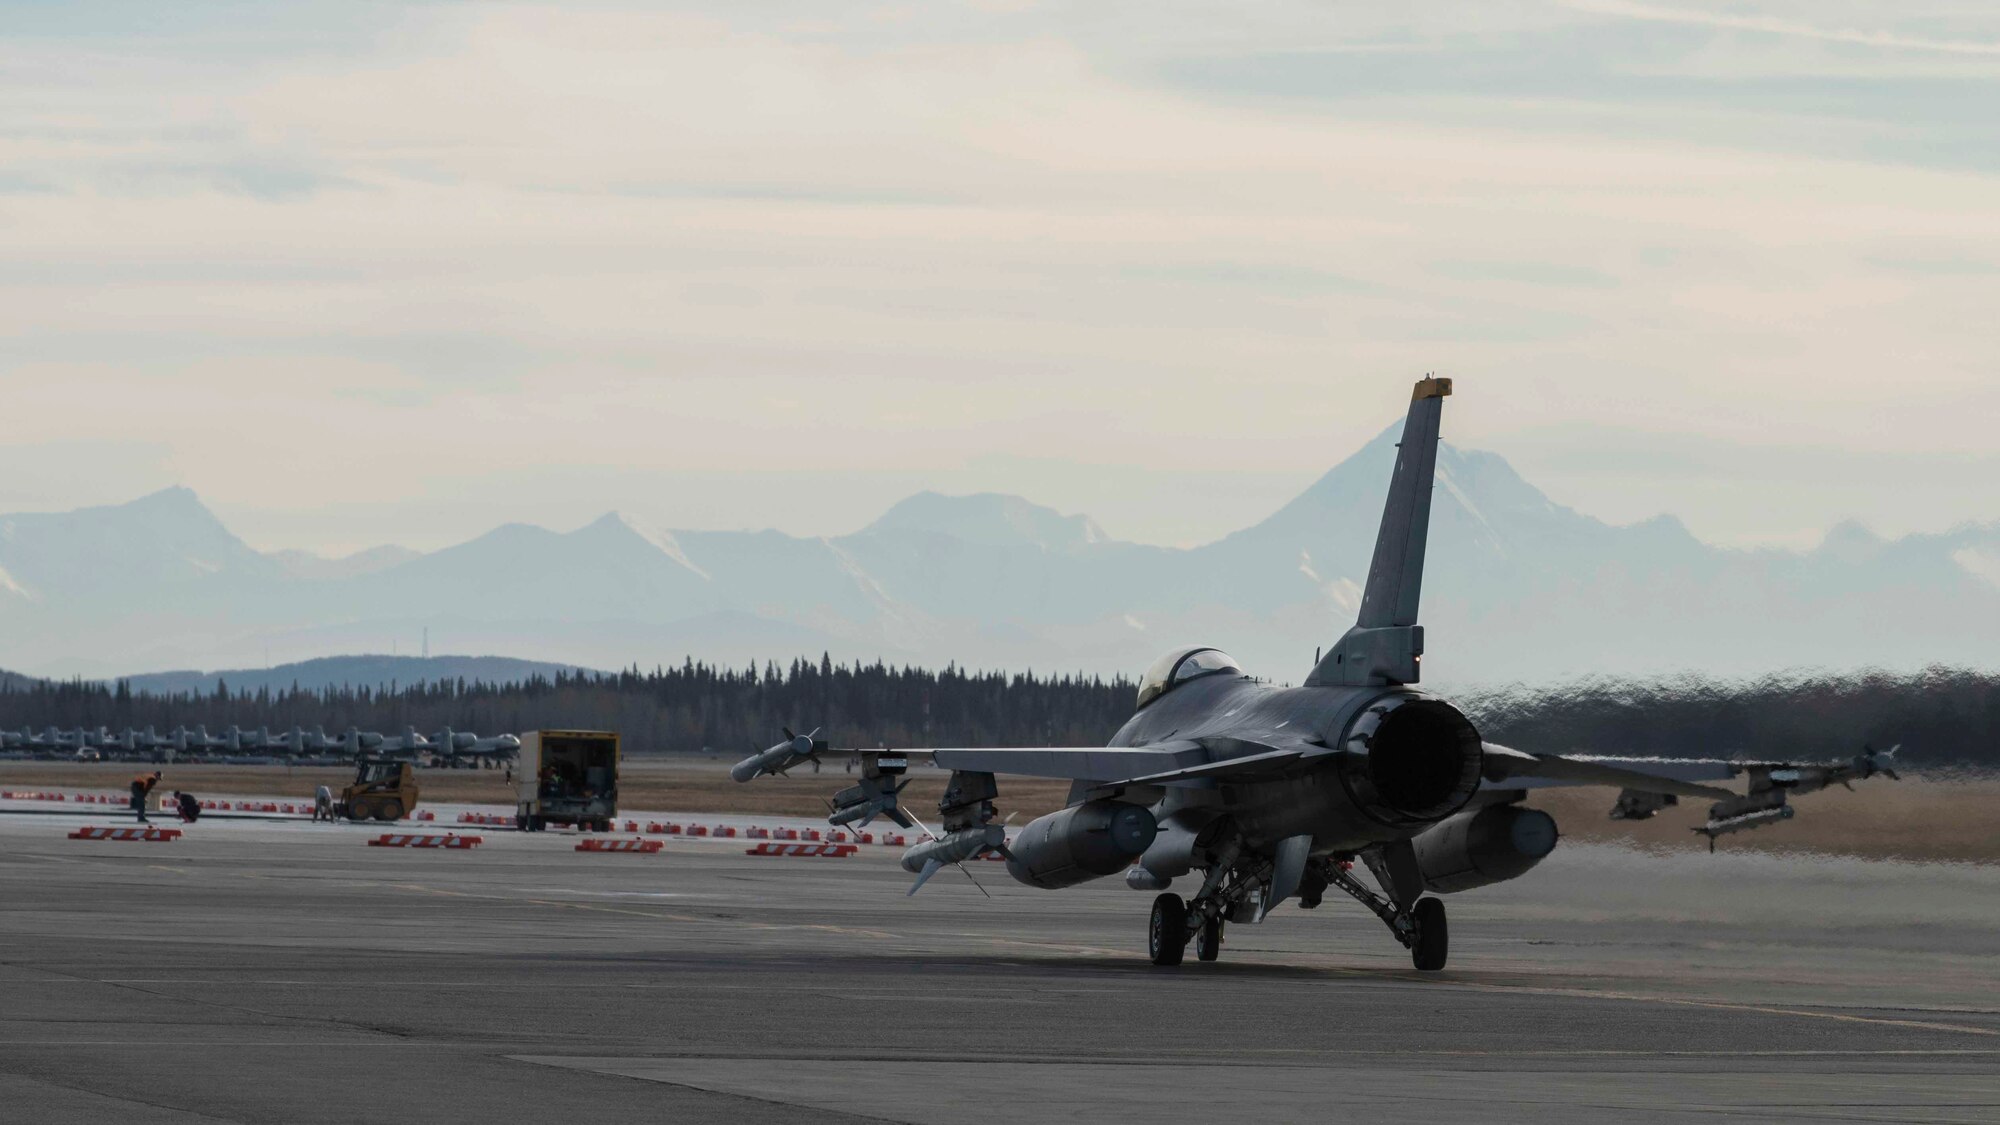 A U.S. Air Force F-16 Fighting Falcon taxis down the runway during exercise Red Flag-Alaska 19-1, at Eielson Air Force Base, Alaska, Oct. 9, 2018. During the exercise, Team Misawa maintainers worked diligently to inspect and repair multiple jets prior to take-off enhancing pilot safety. (U.S. Air Force photo by Airman 1st Class Collette Brooks)